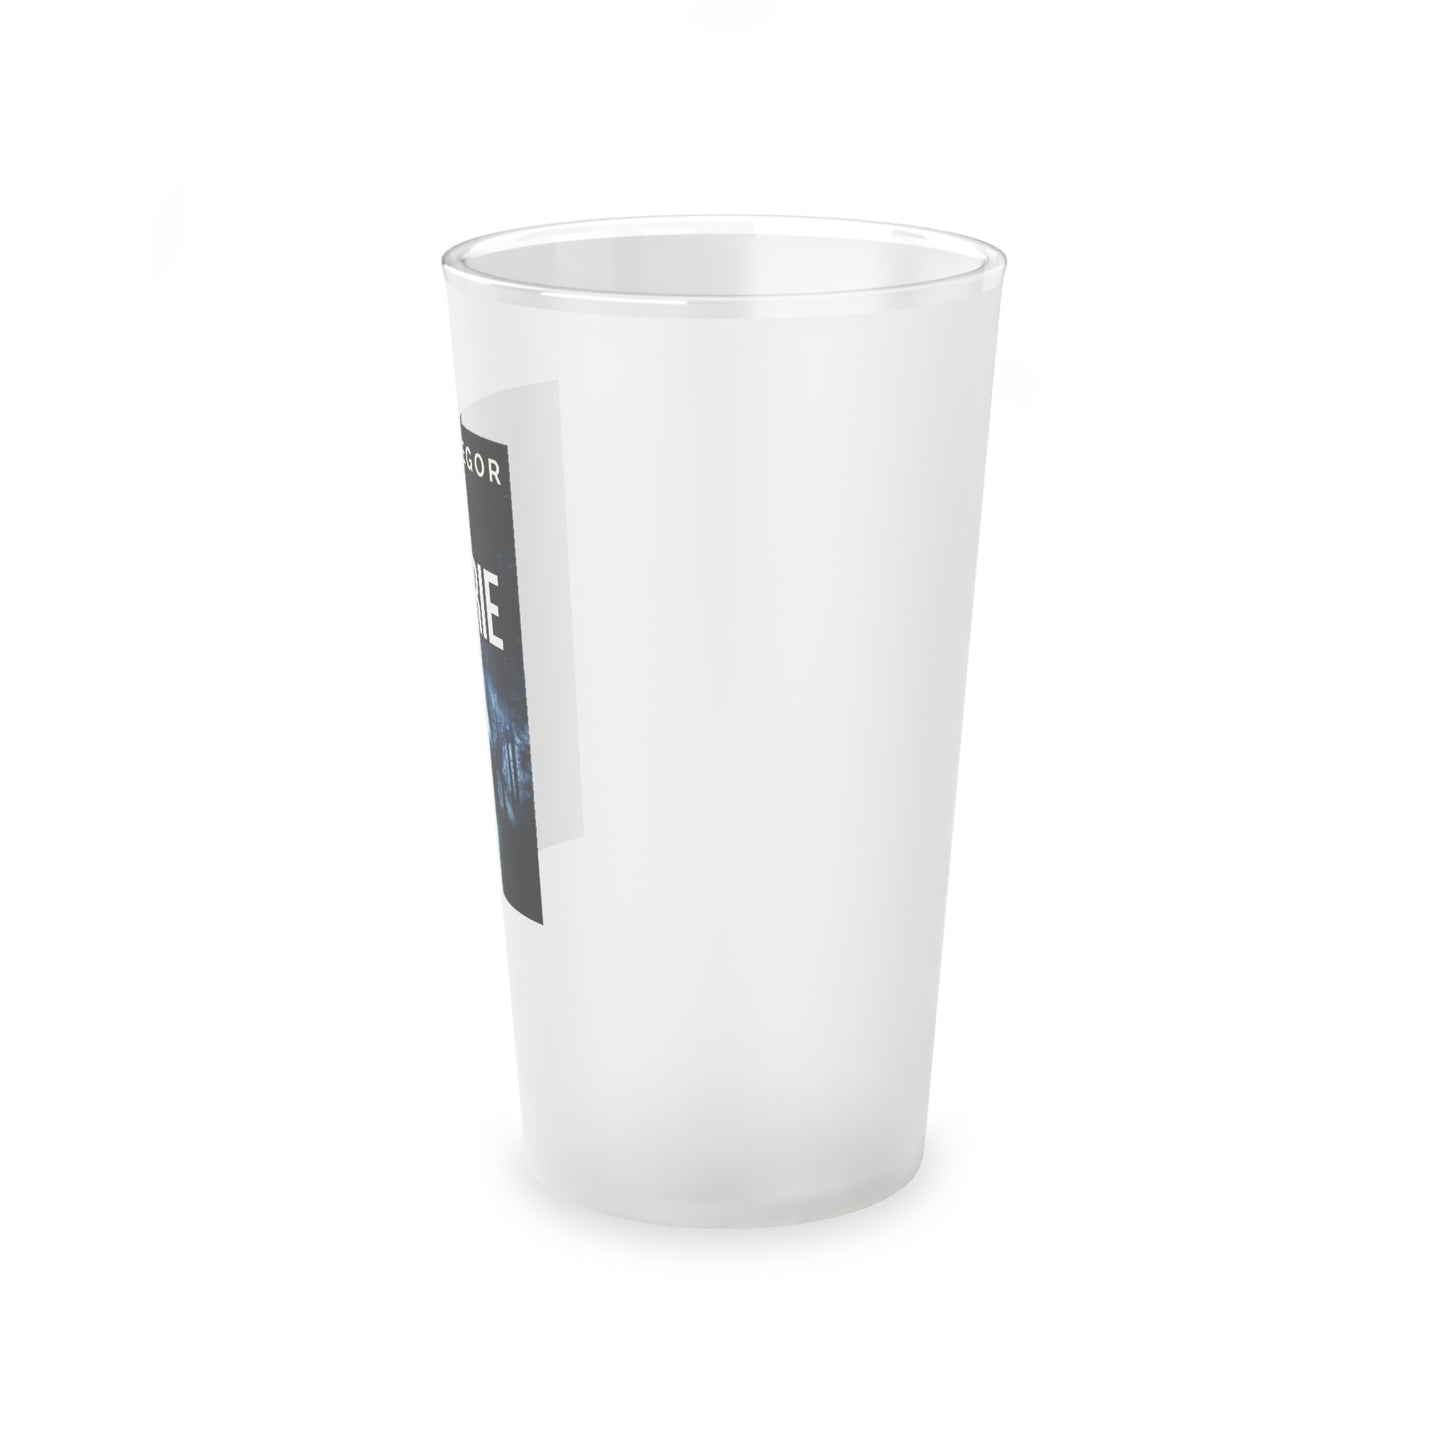 The Coterie - Frosted Pint Glass